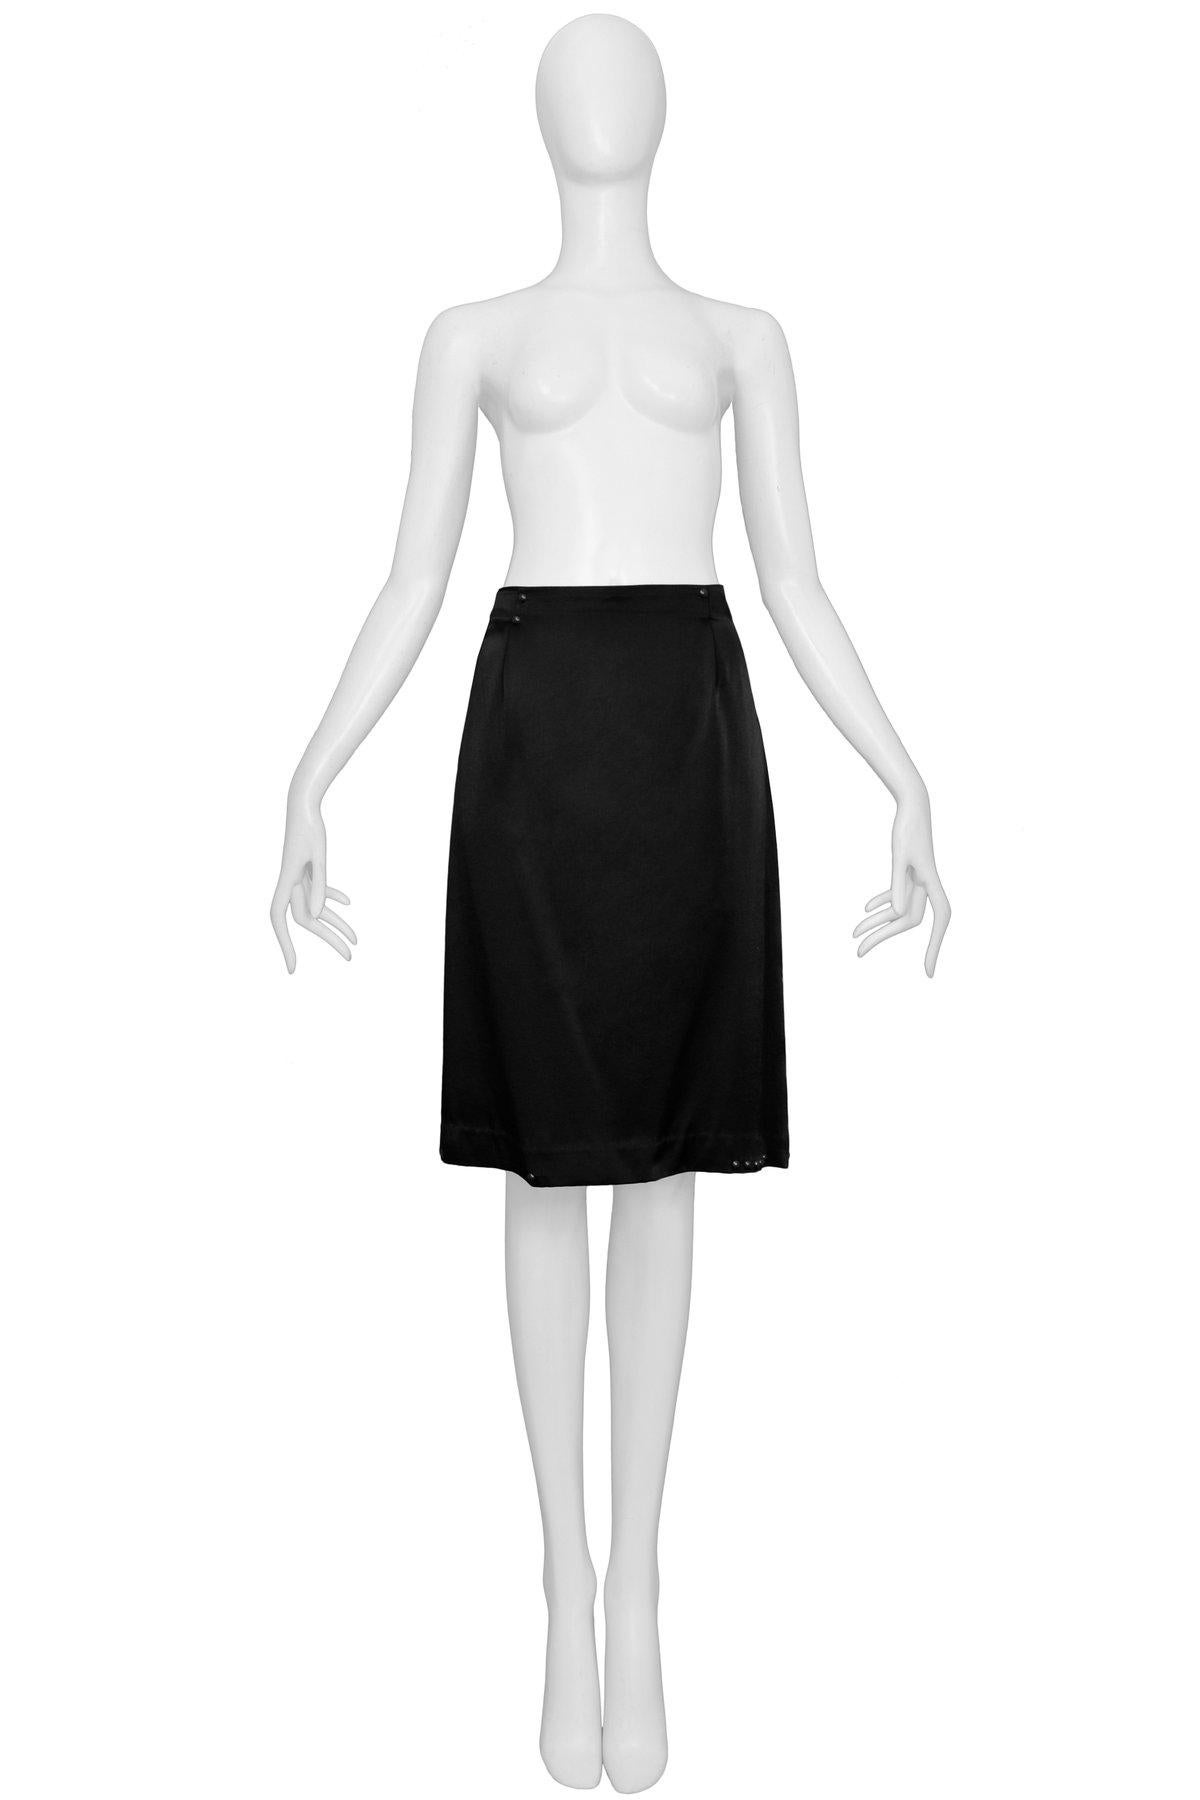 Resurrection Vintage is excited to offer a vintage Maison Martin Margiela black satin 20's style skirt with pleated yoke and gunmetal round studs at the front and back waistband and hemline.

Maison Martin Margiela
Size 42
100% Viscose
2006